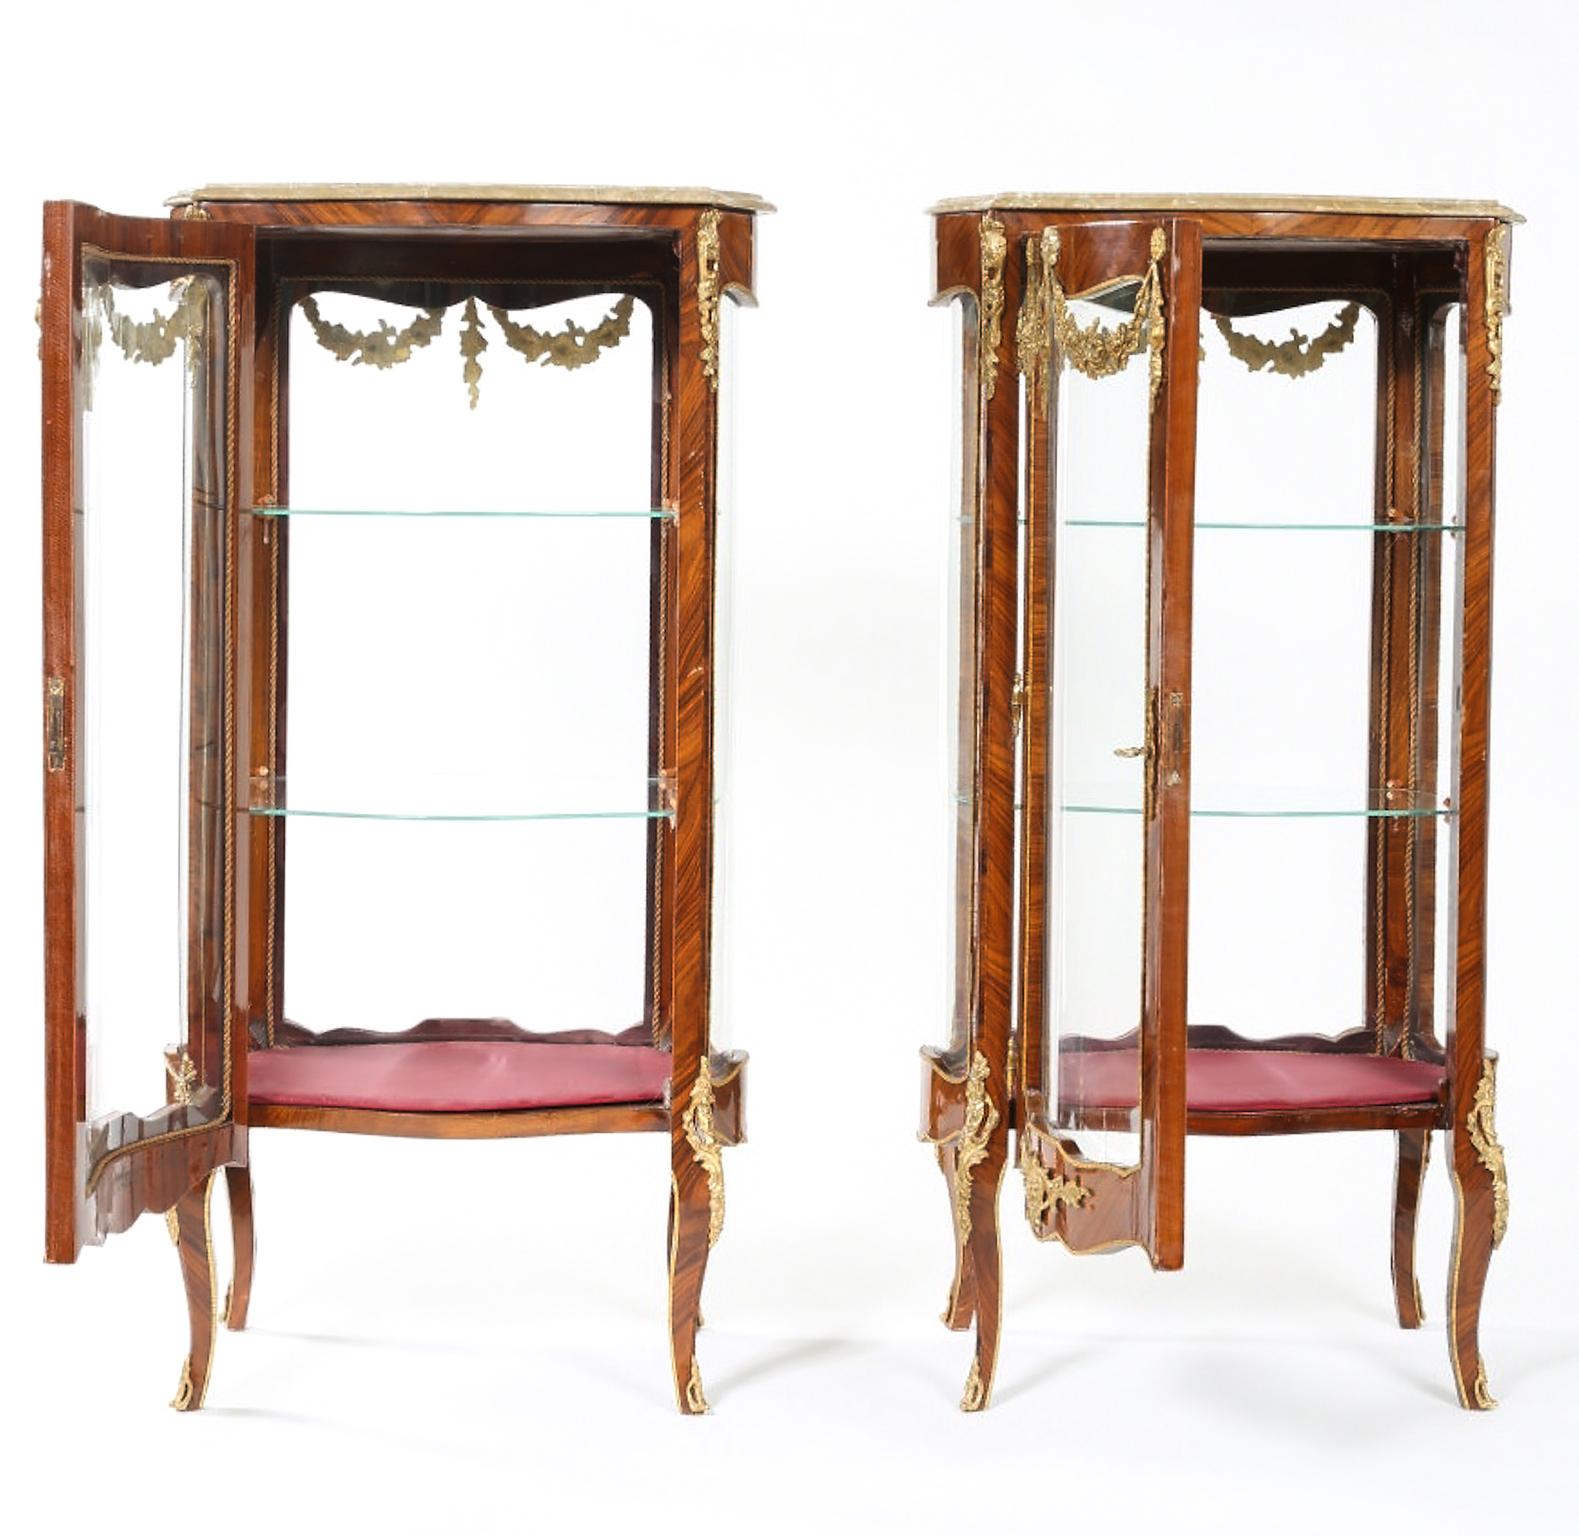 Pair of Louis XV style kingwood veneered vitrine with brass design details. Ormolu-mounted marble topped with glass shelves and bowed glass on all sides. Each one is very sturdy & in good vintage condition with wear appropriate with age / use. Each